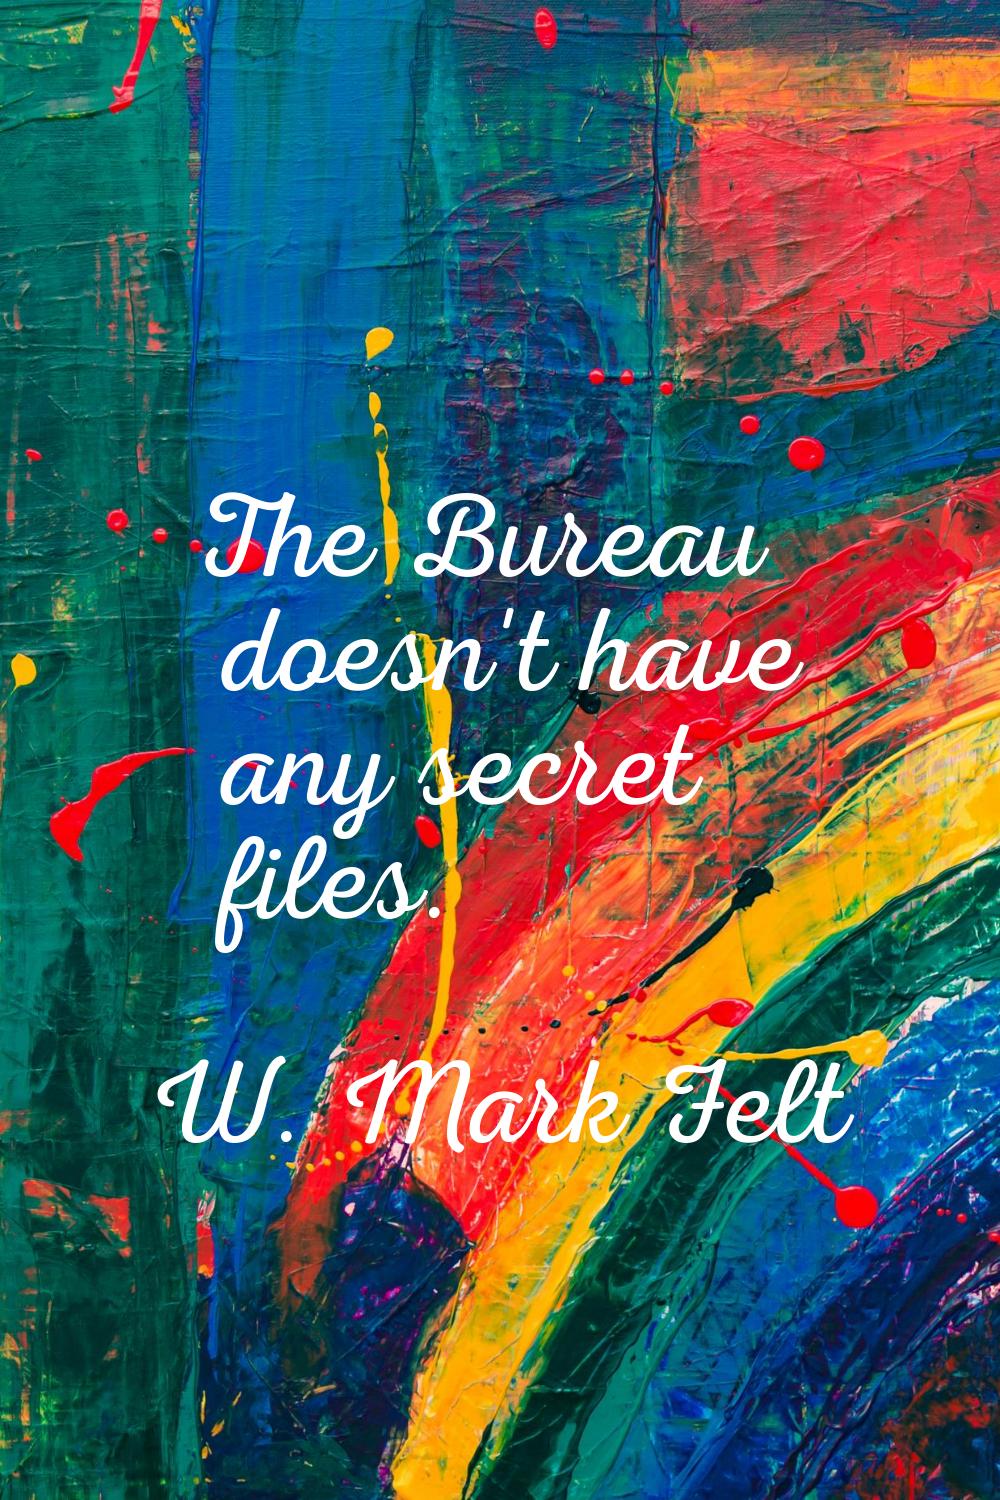 The Bureau doesn't have any secret files.